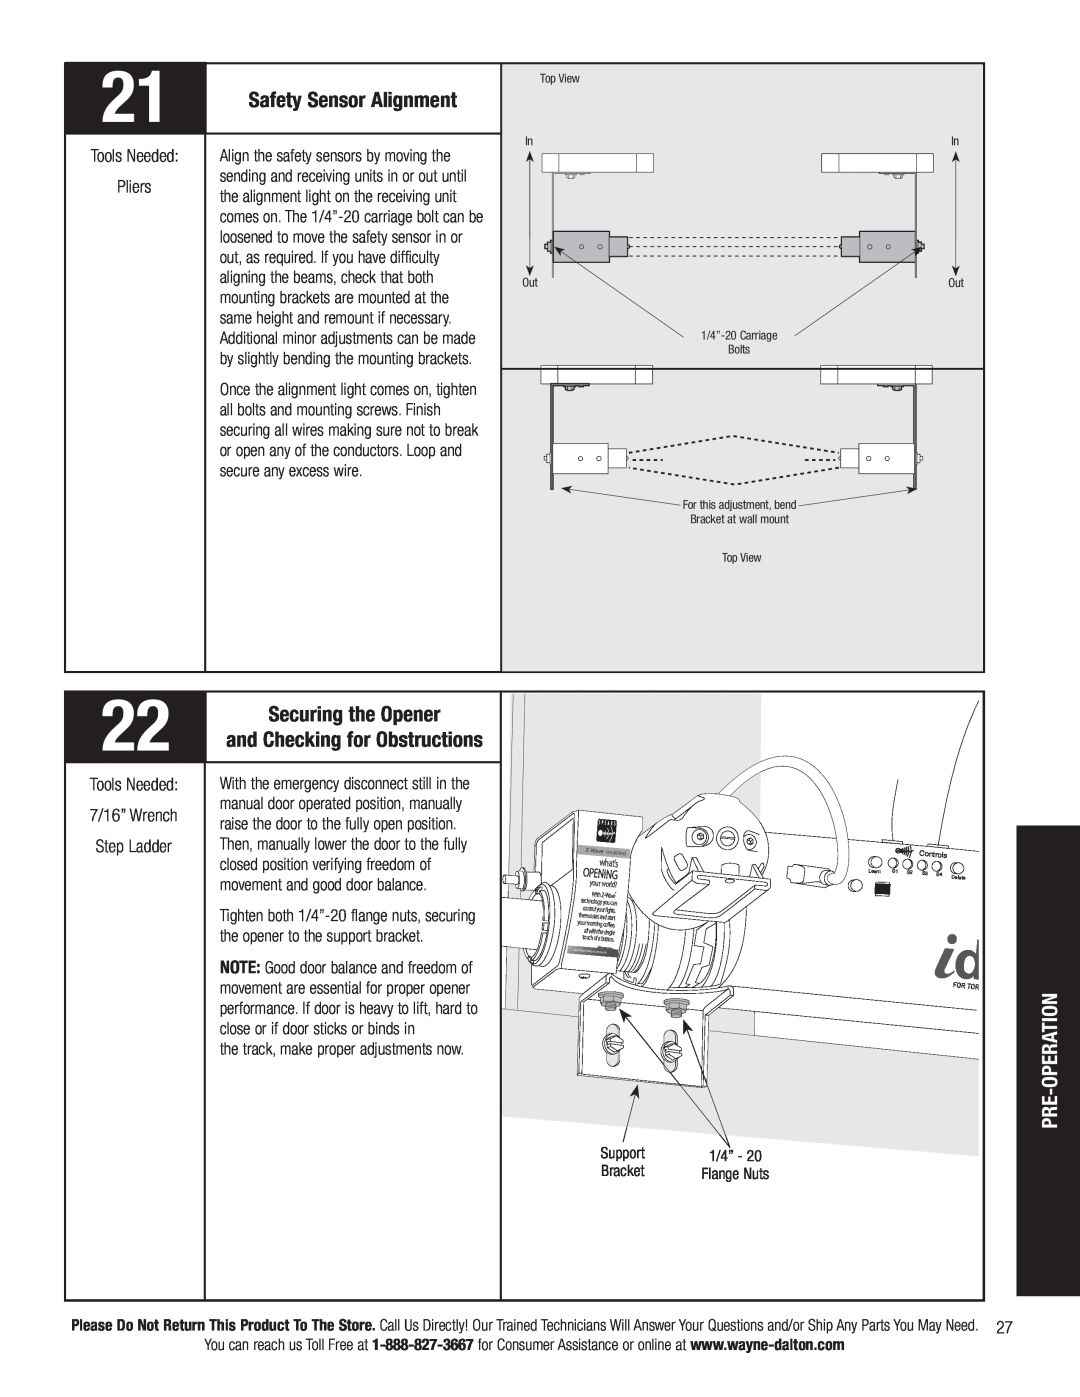 Wayne-Dalton 3790-Z installation instructions Pre-Operation, Safety Sensor Alignment, and Checking for Obstructions 